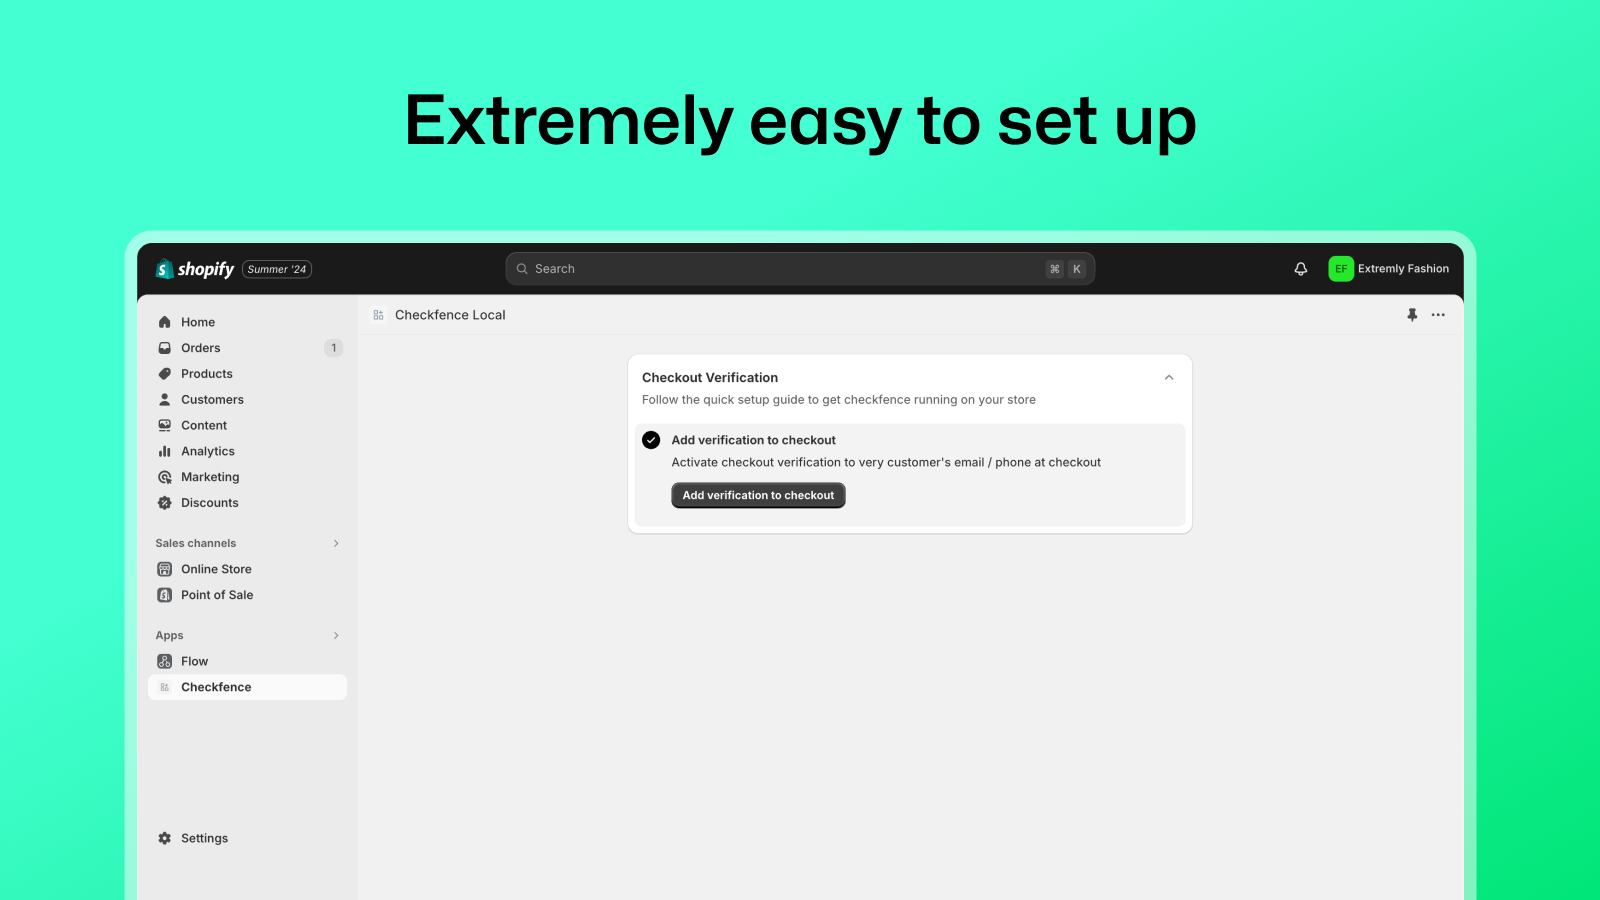 Easily set up Checkfence on your shopify store